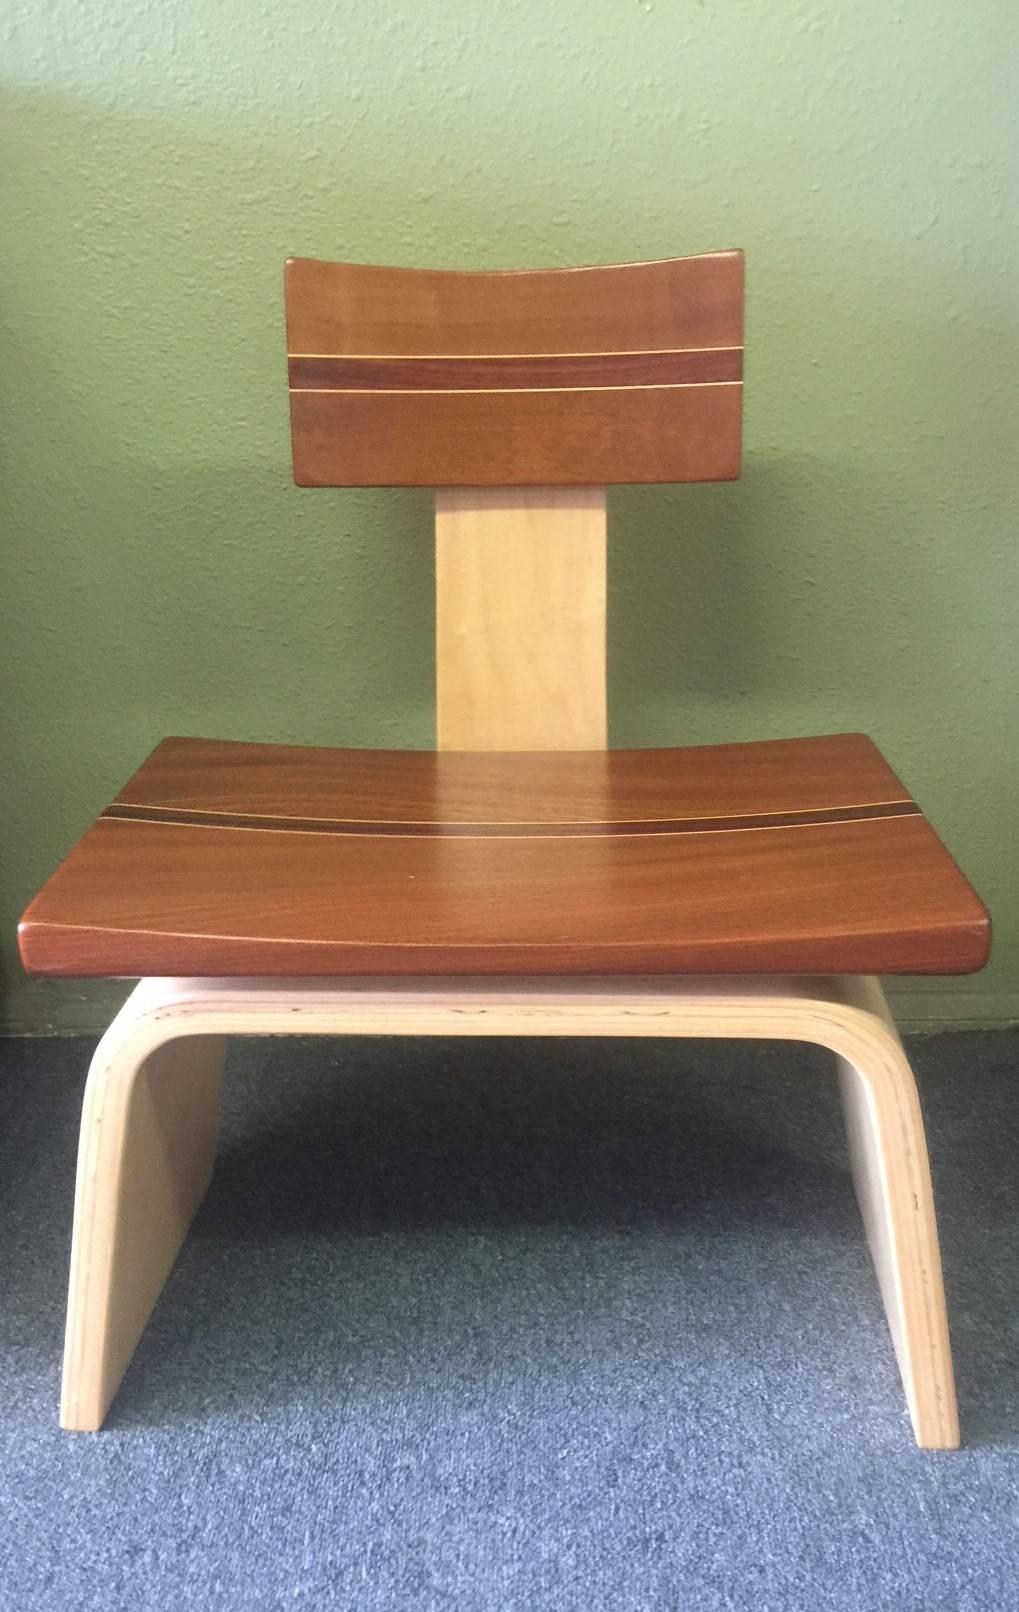 Custom hardwood game chair by California furniture make David Levy, circa 2000s. The chair has a sculpted saddle seat made of exotic and domestic hardwoods. The base is made of solid veneers of maple and formed into a curve. The saddle seat is made